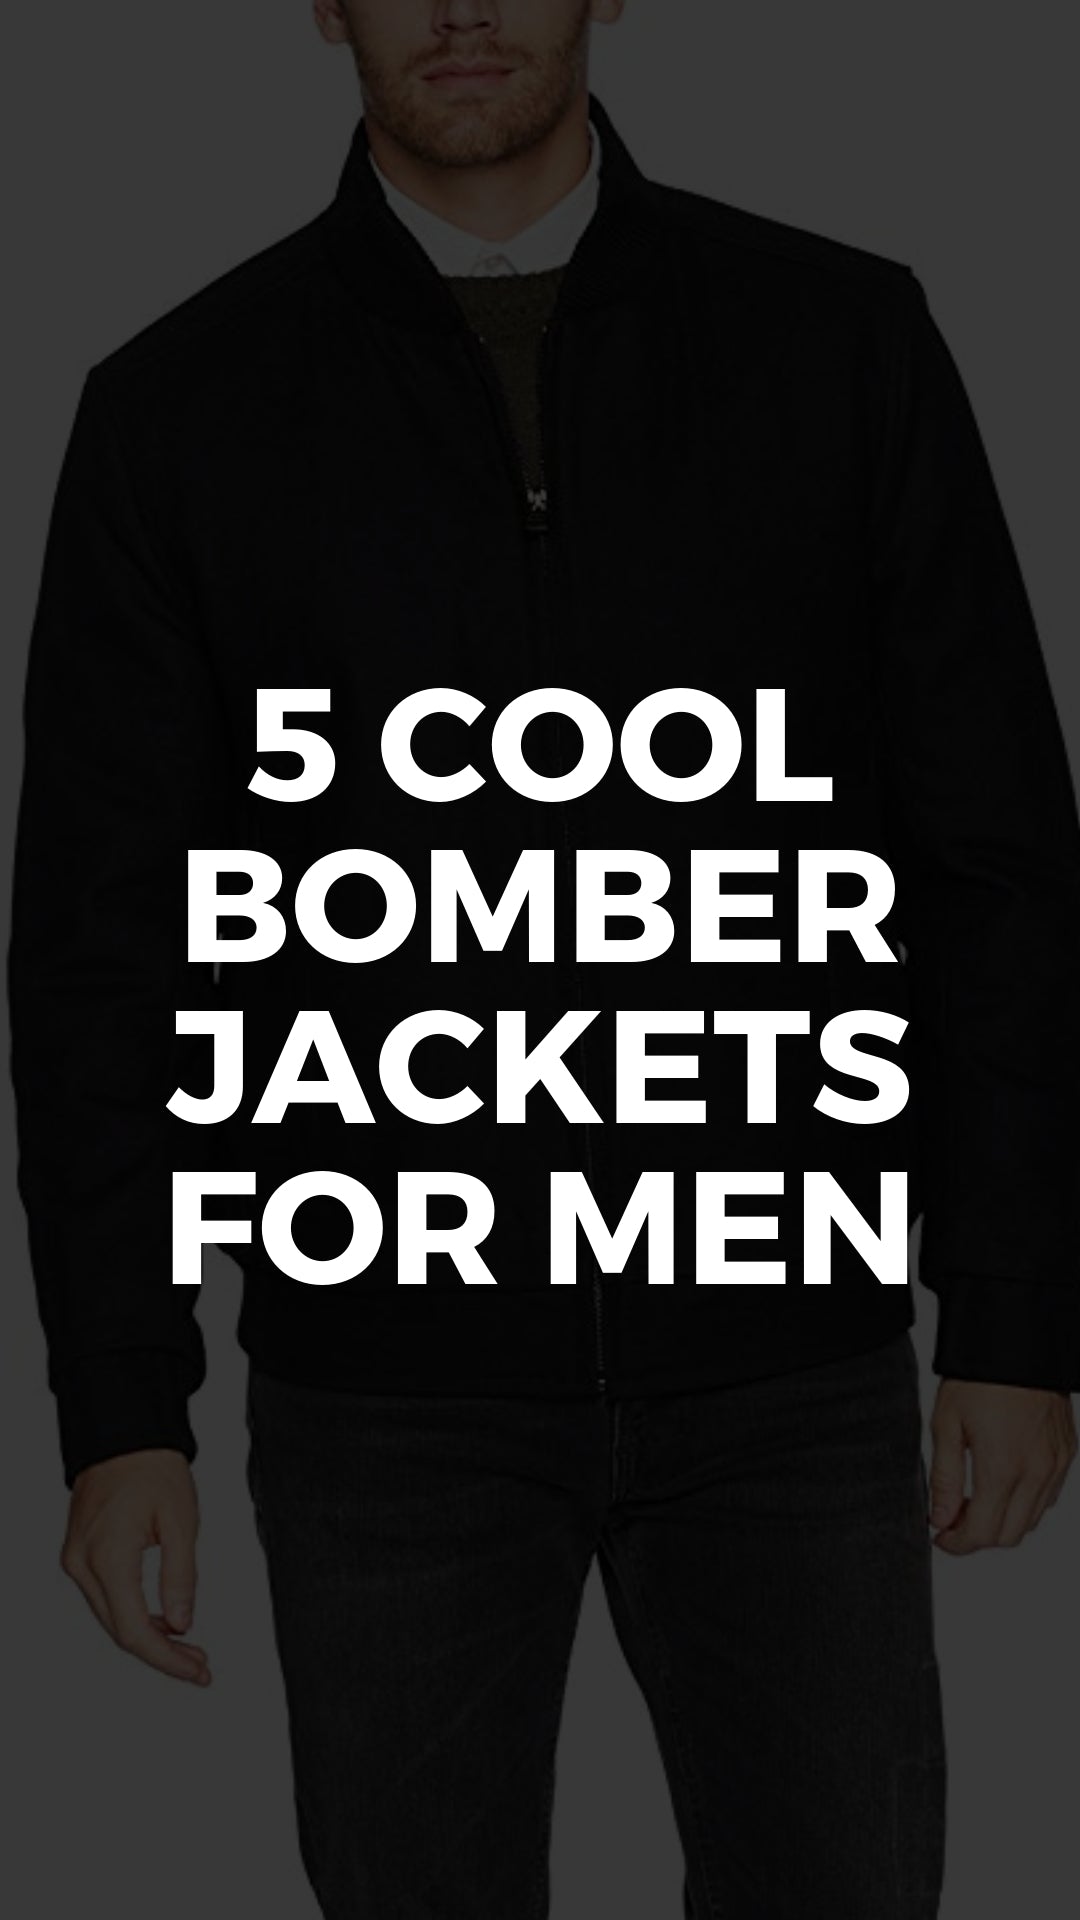 5 Cool Bomber Jackets To Add To Your Winter Wardrobe #bomber #jackets #mens #fashion 